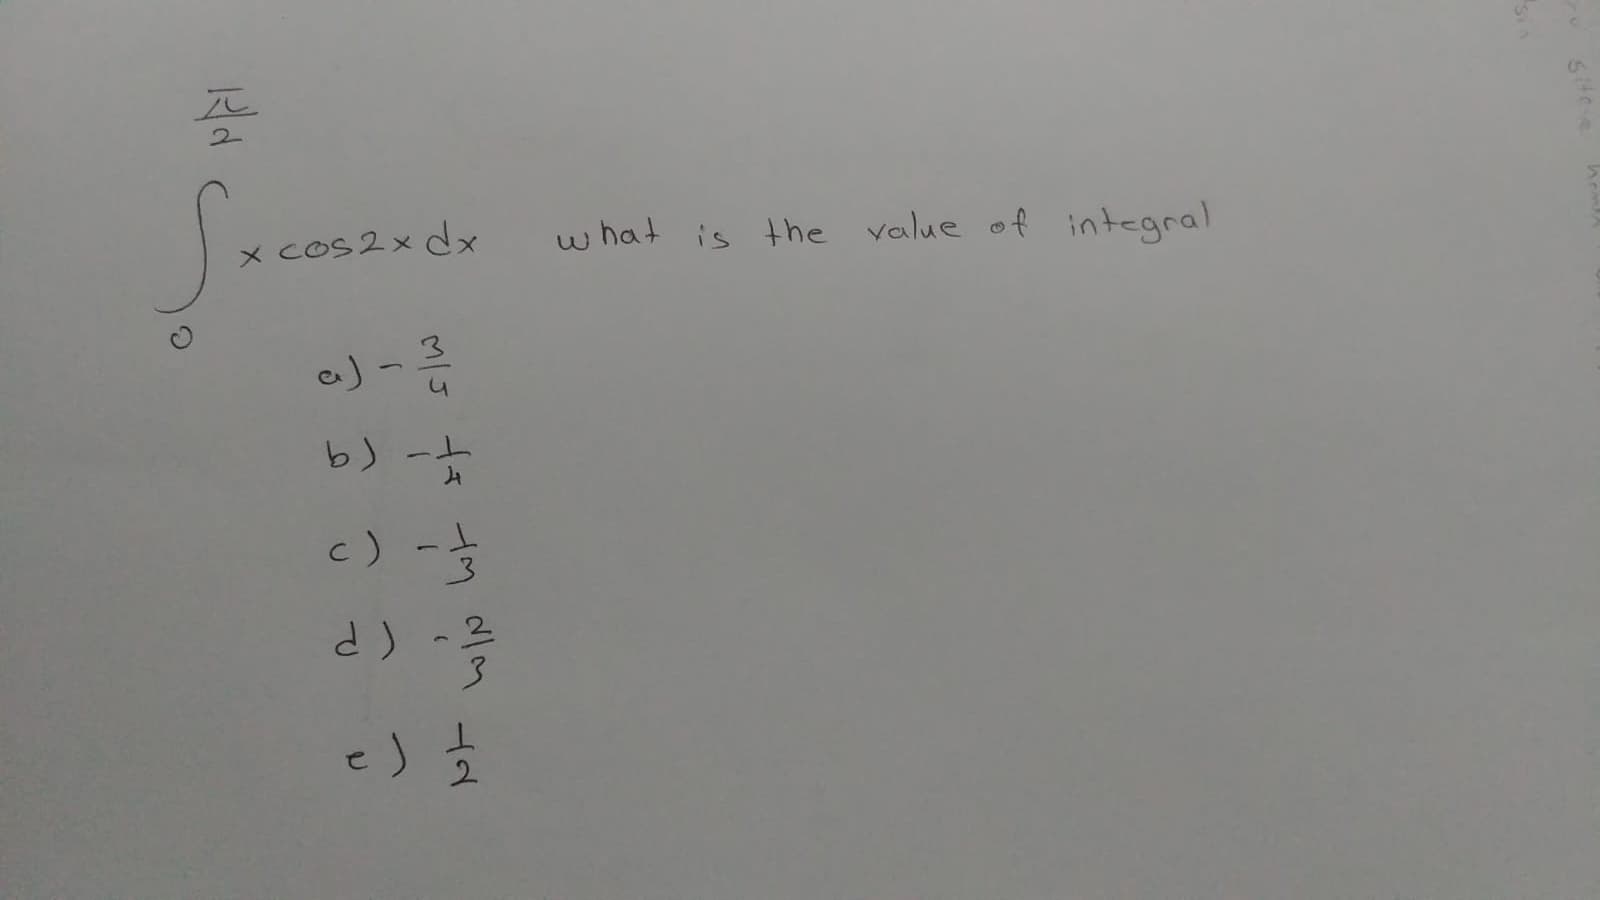 2.
x COs2x dx
w hat is the value of integral
3.
